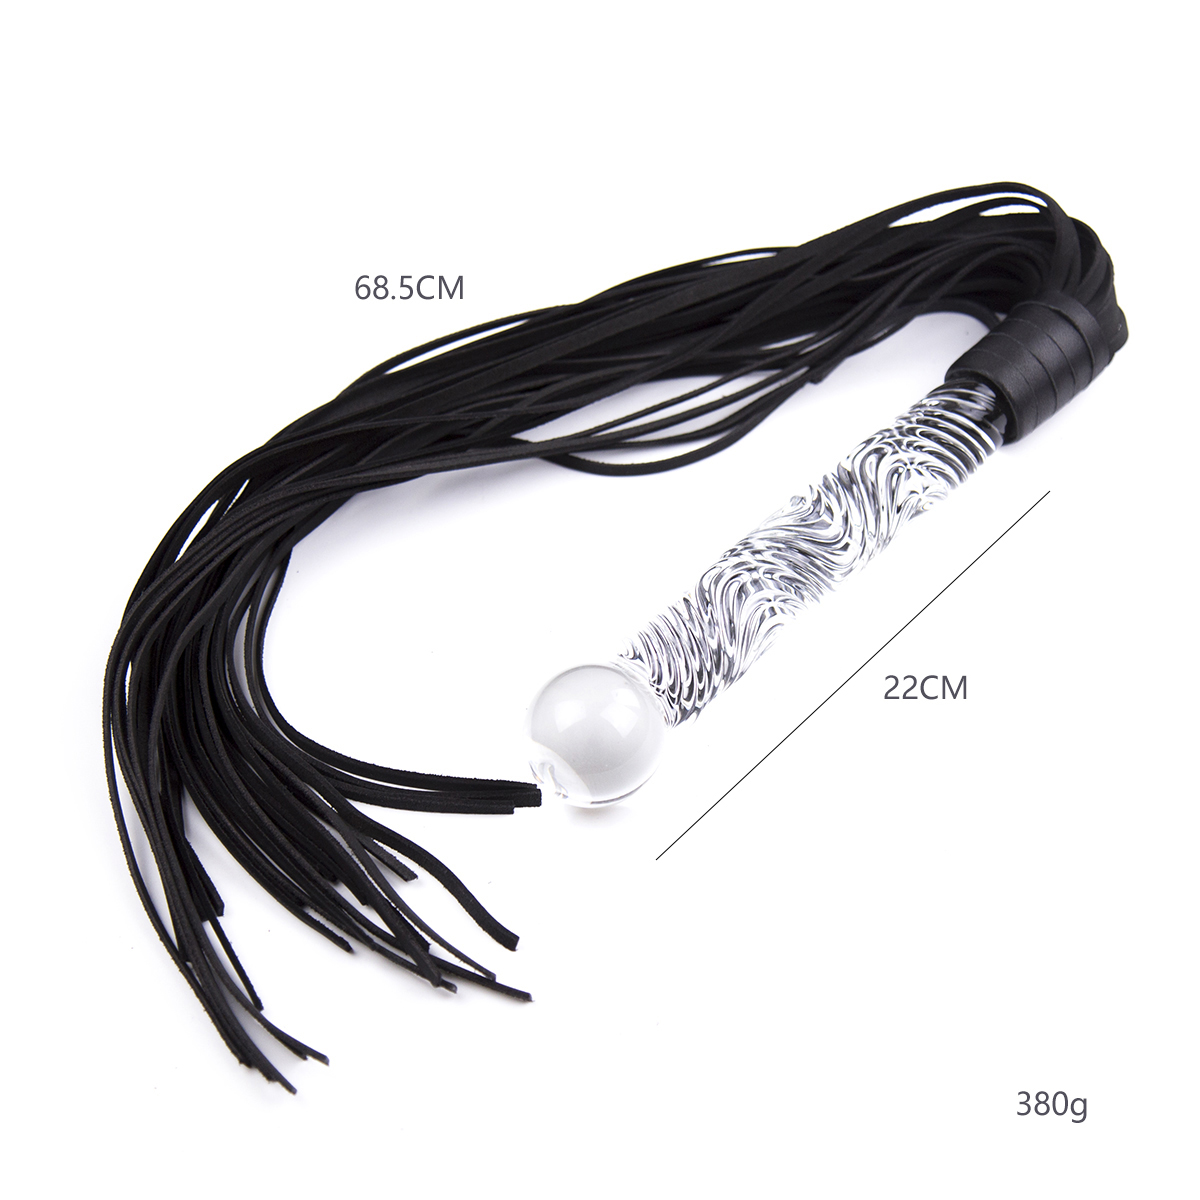 Fancy-Black-Flogger-with-Glass-Handle-OPR-321103-3